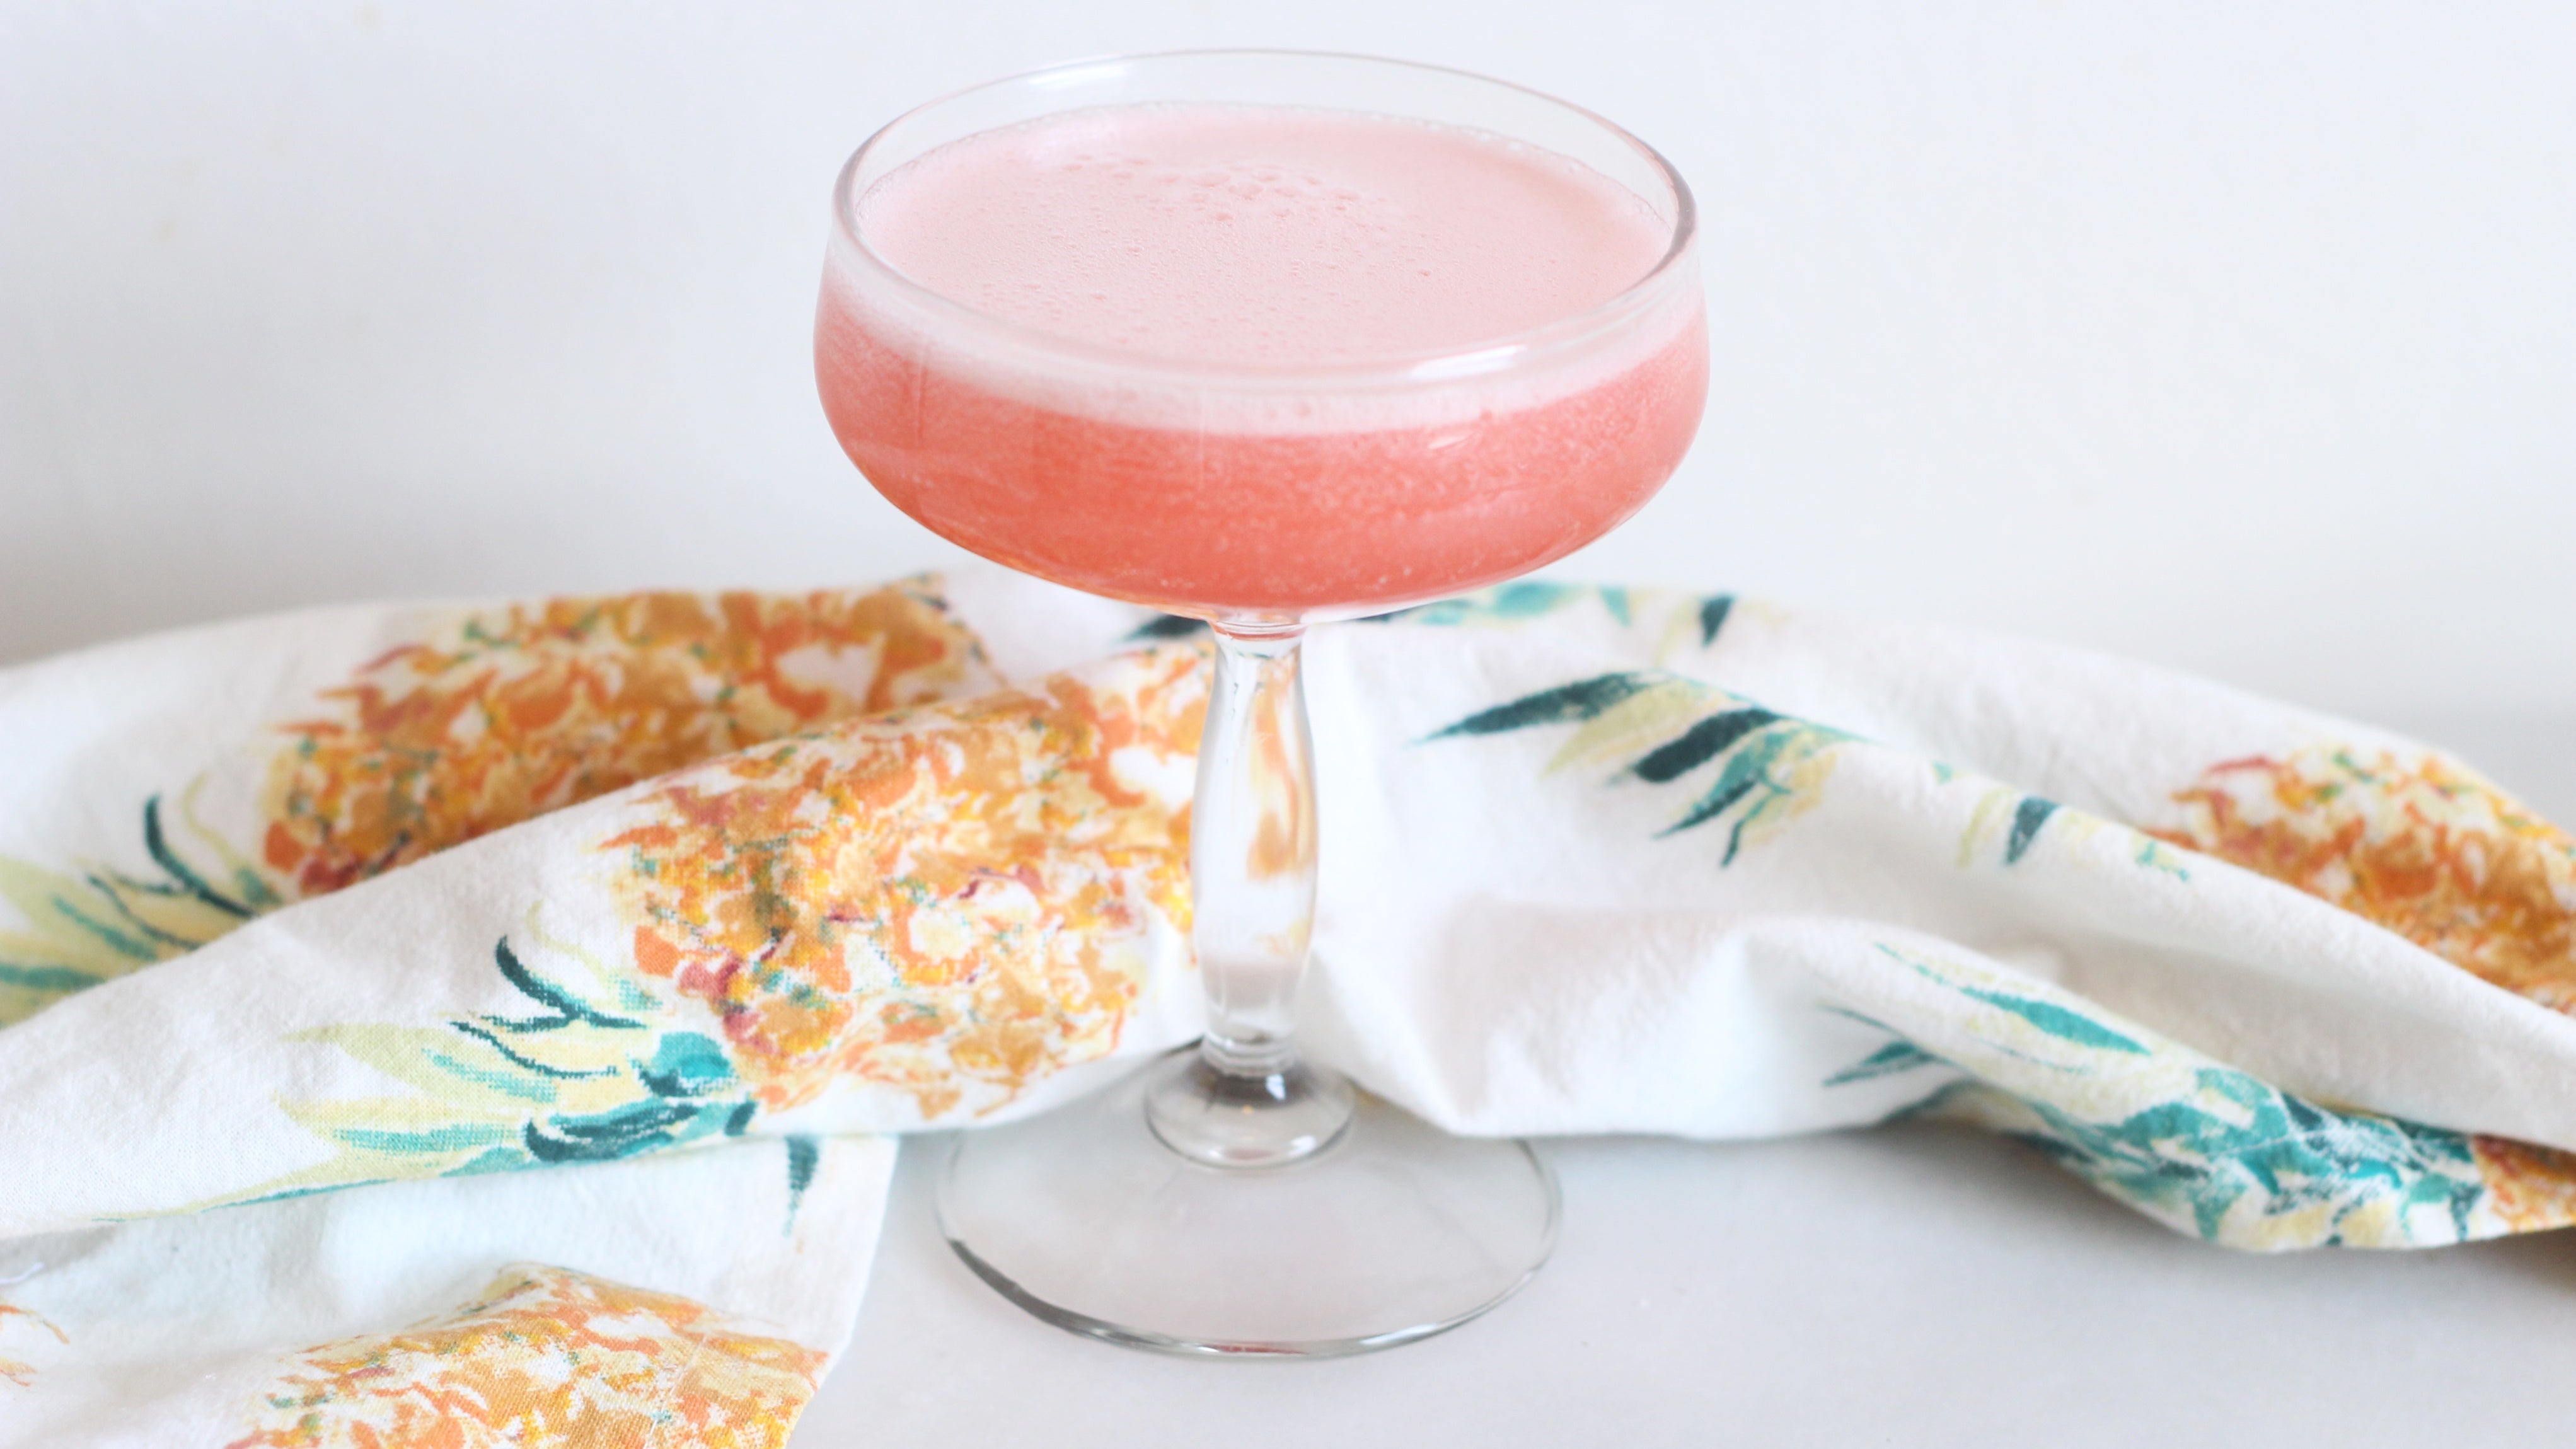 This Pretty Pink Pineapple Drink Is Tougher Than It Looks